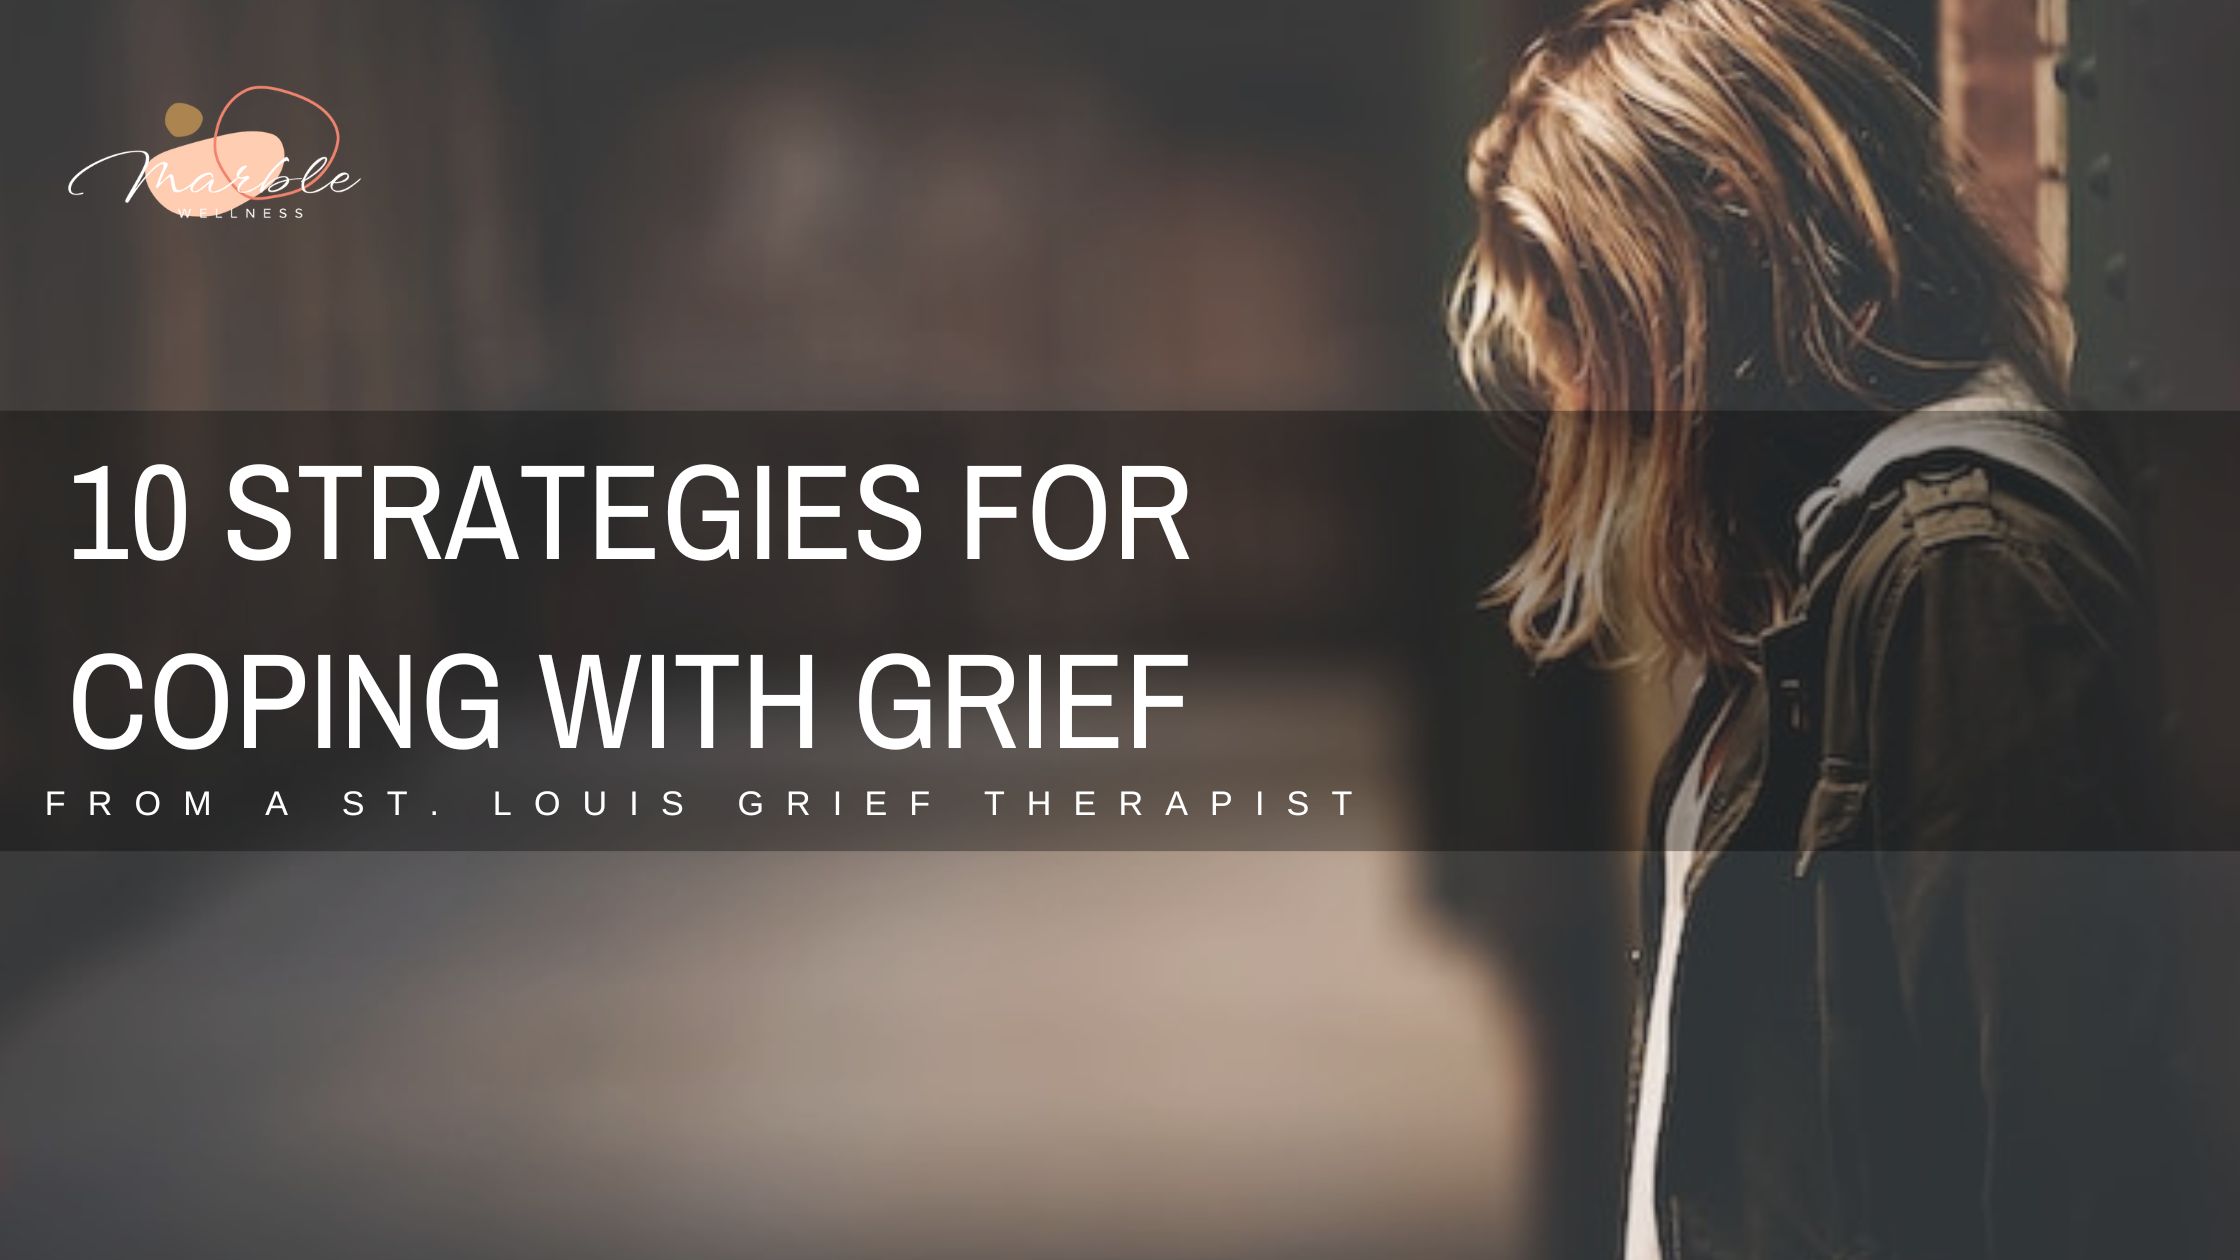 10 Strategies For Coping with Grief from a St. Louis Grief Therapist